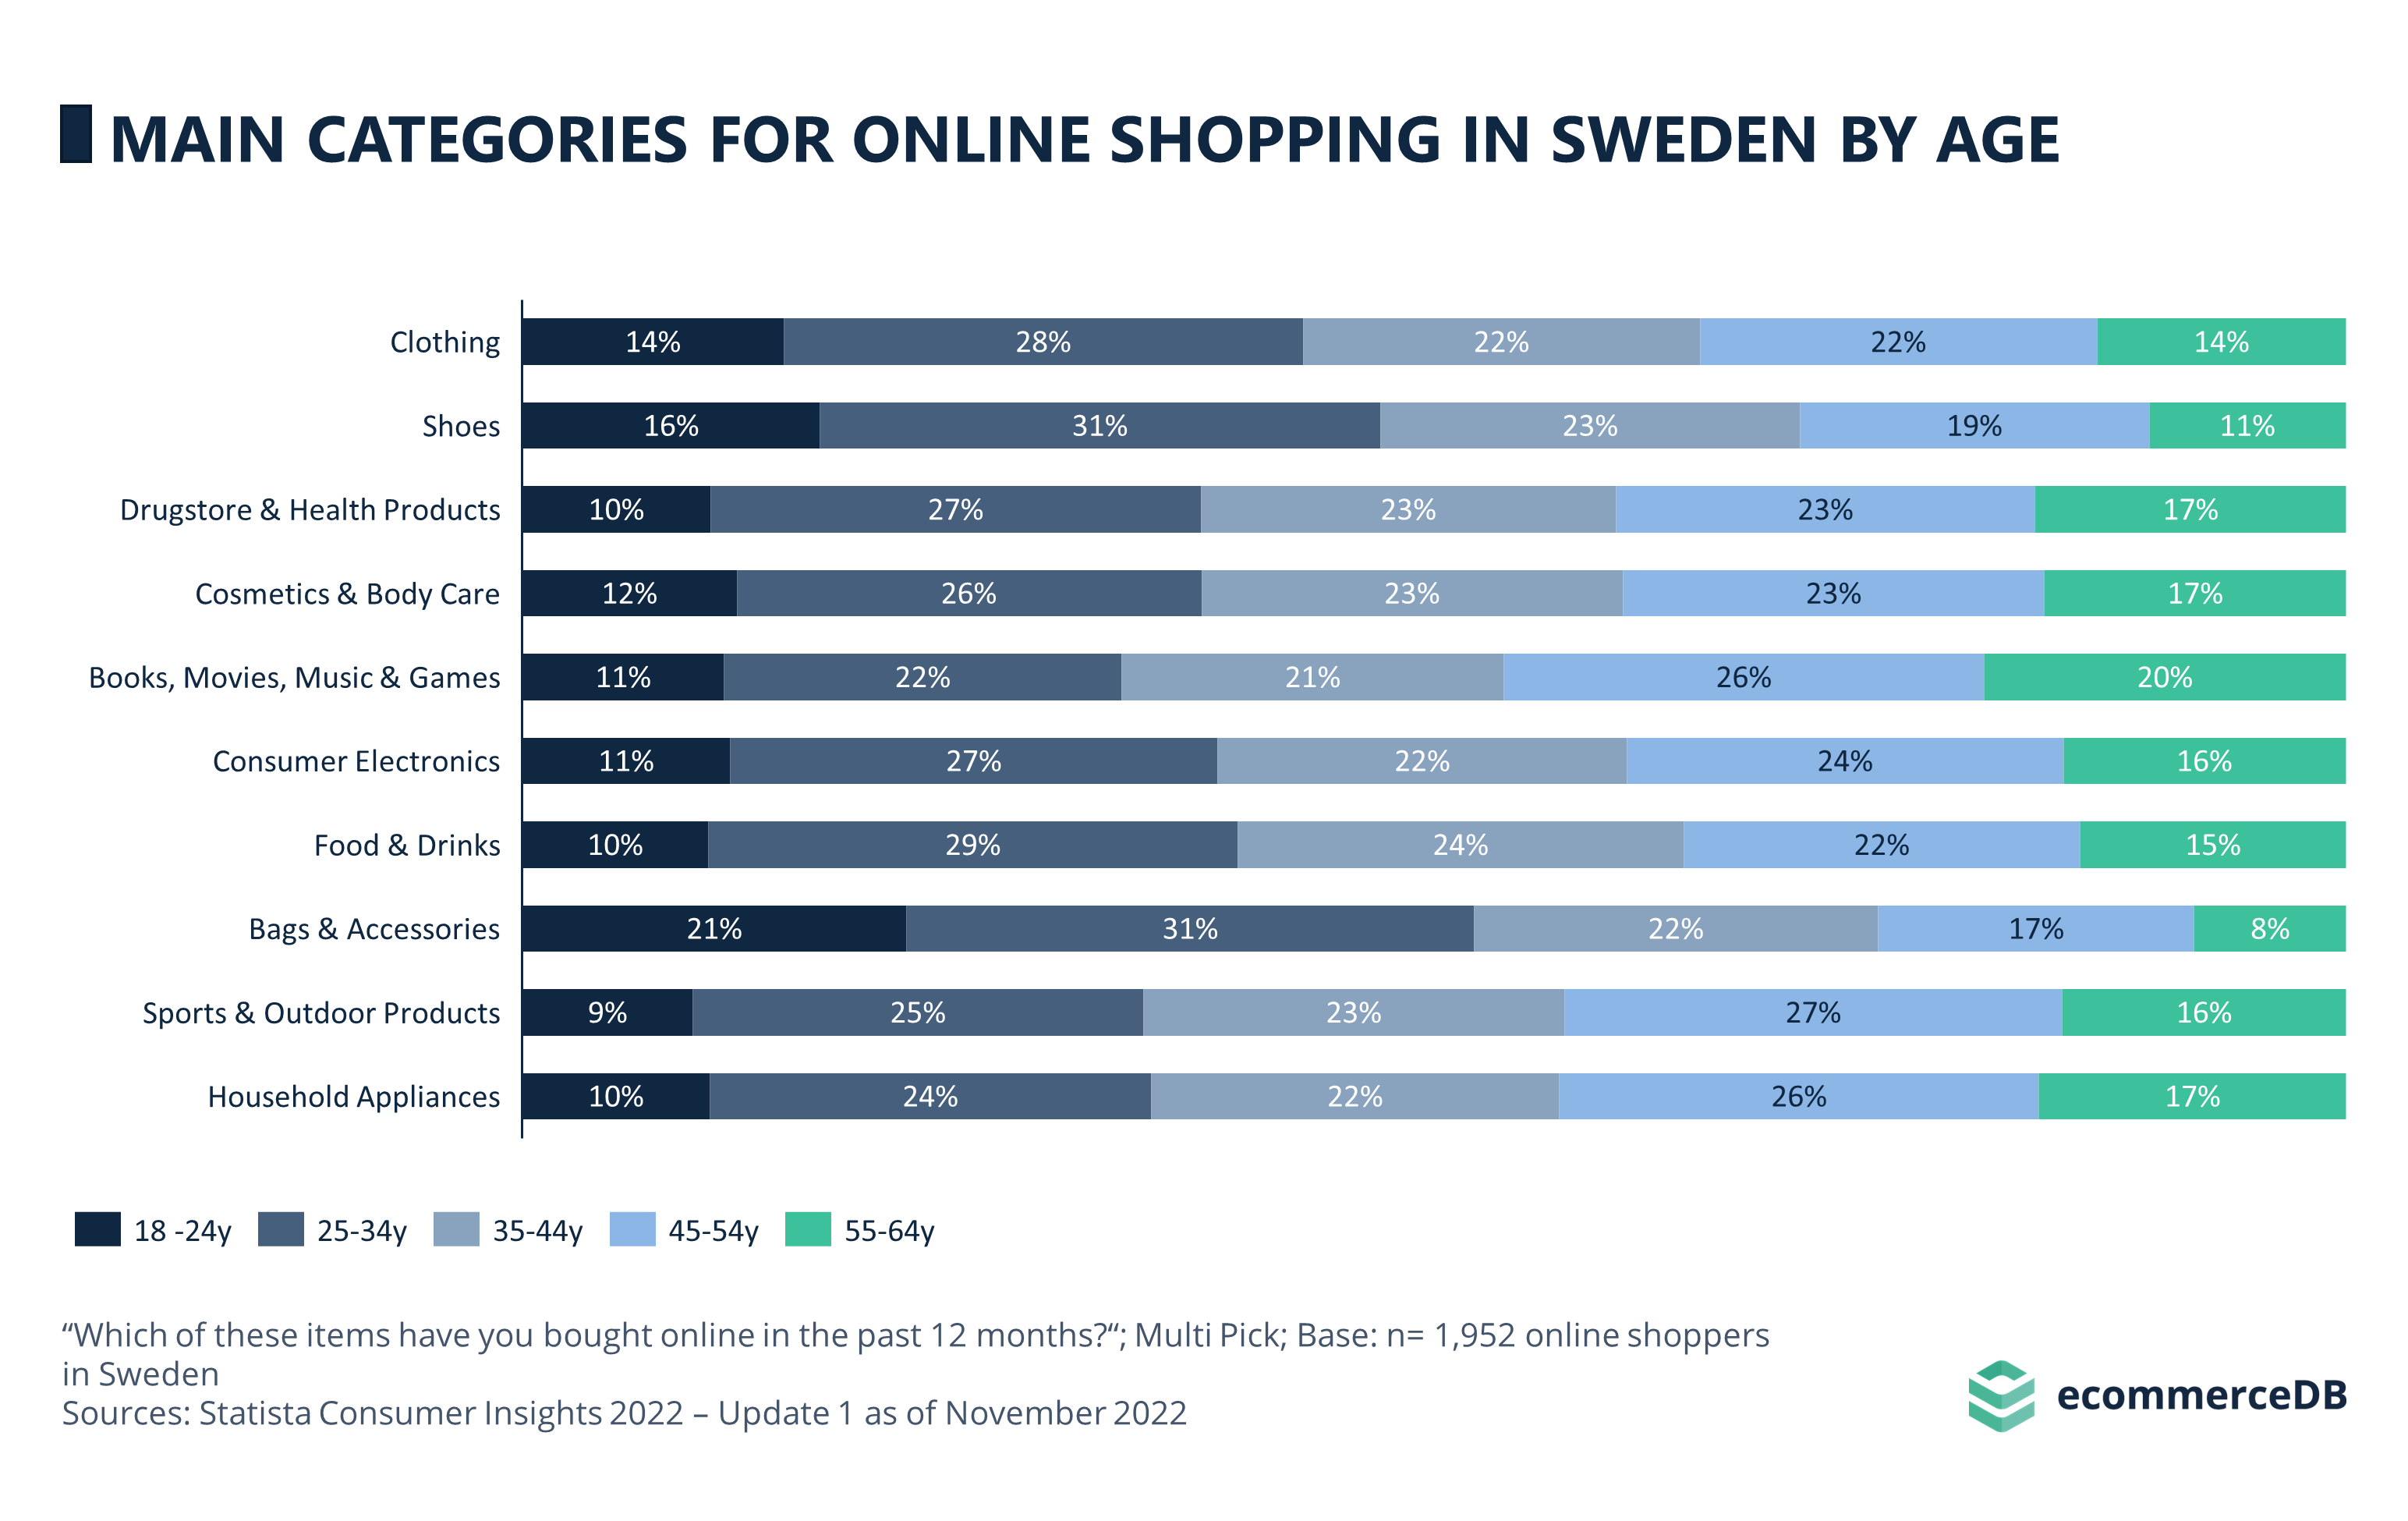 MAIN CATEGORIES FOR ONLINE SHOPPING IN SWEDEN BY AGE